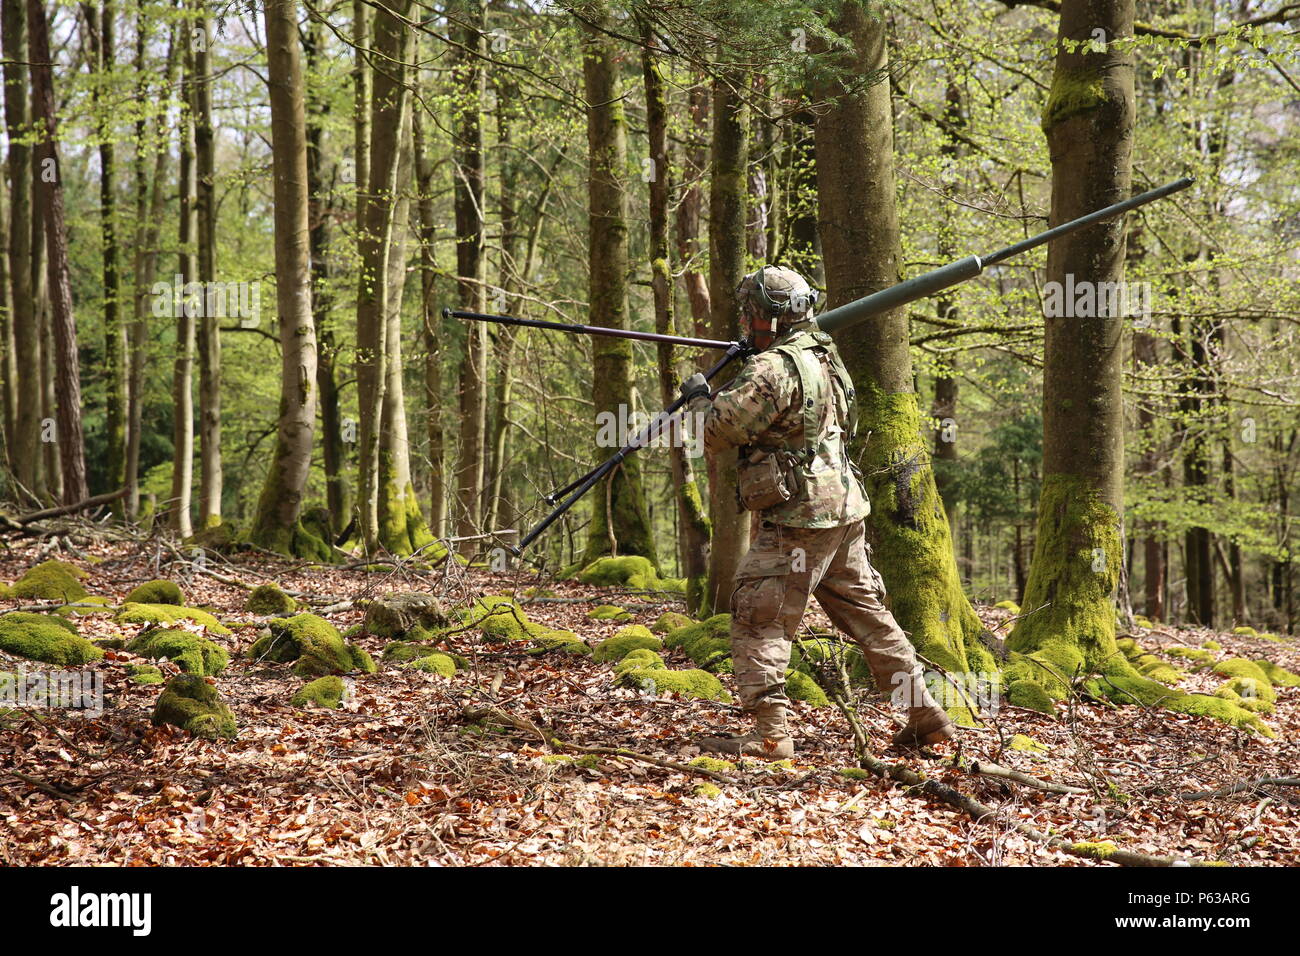 A U.S. Soldier of 1st Squadron, 91st Cavalry Regiment, 173rd Airborne Brigade relocates an antenna while conducting tactical operations during exercise Saber Junction 16 at the U.S. Army’s Joint Multinational Readiness Center (JMRC) in Hohenfels, Germany, April 16, 2016. Saber Junction 16 is the U.S. Army Europe’s 173rd Airborne Brigade’s combat training center certification exercise, taking place at the JMRC in Hohenfels, Germany, Mar. 31-Apr. 24, 2016.  The exercise is designed to evaluate the readiness of the Army’s Europe-based combat brigades to conduct unified land operations and promote Stock Photo